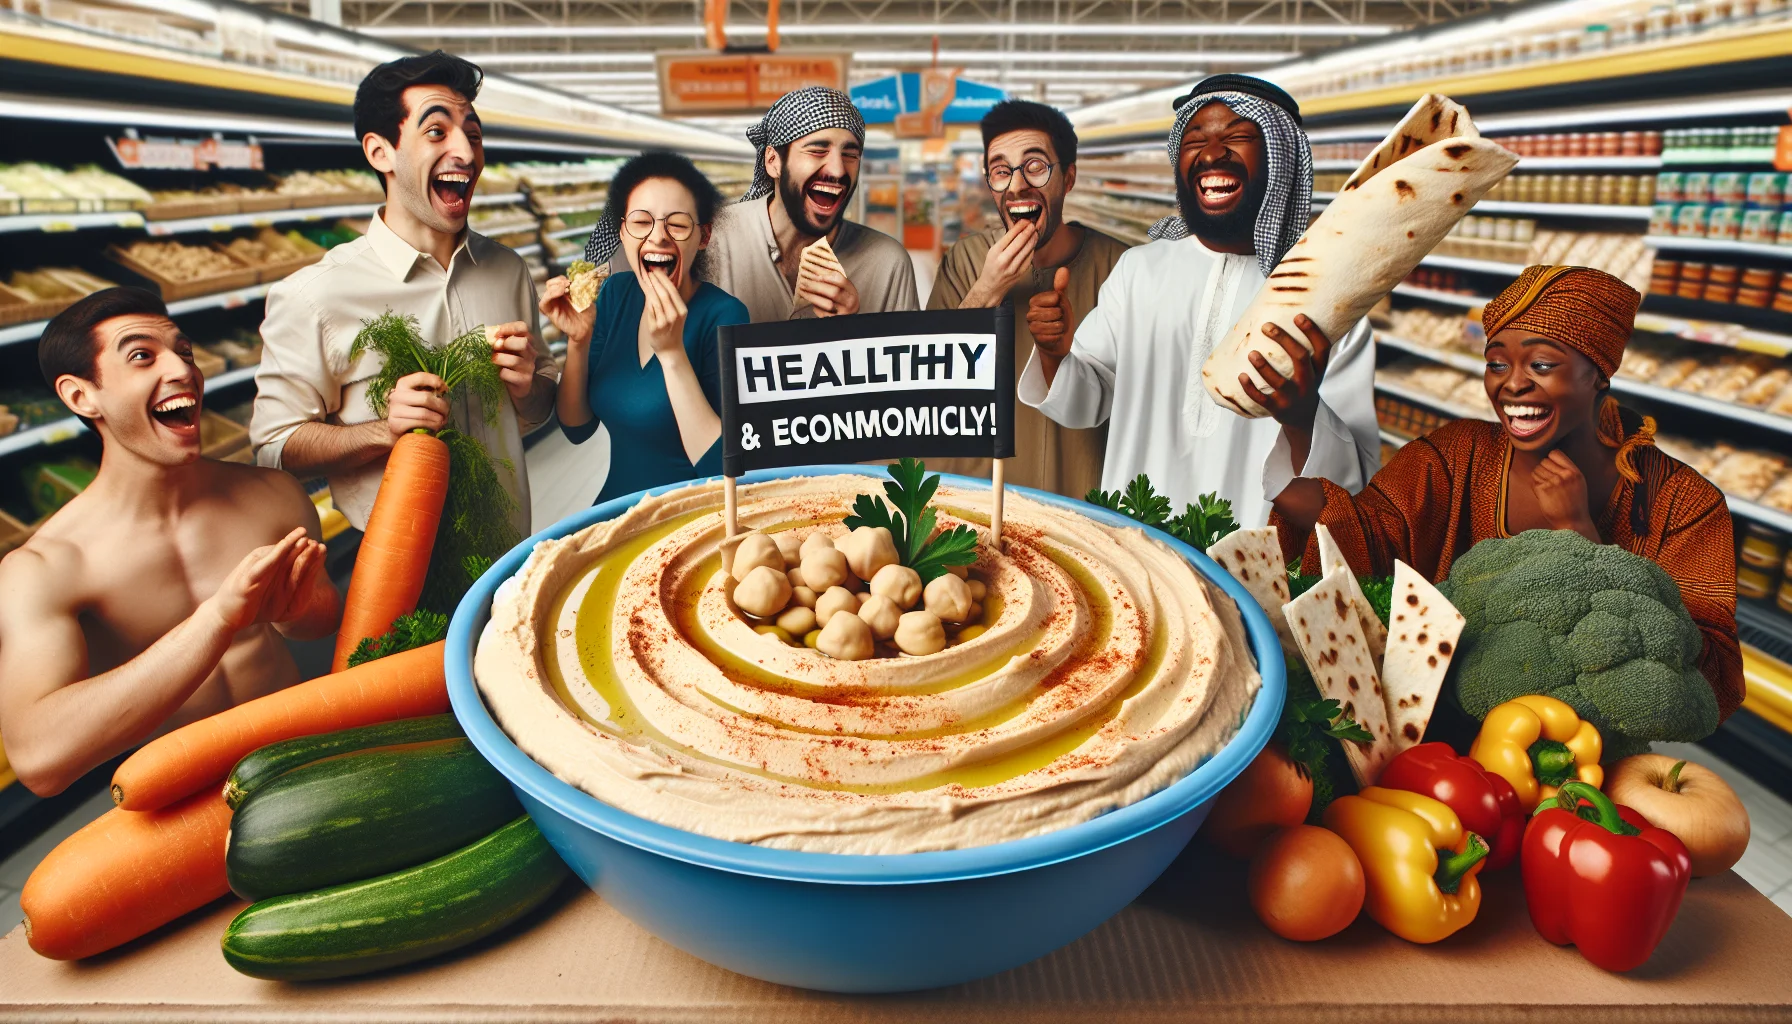 Envision a humorous and realistic scenario promoting healthy eating on a budget. There's a bowl of creamy beige hummus in the center of a supermarket. The hummus is garnished with olive oil, paprika and parsley. It has a mini flag with 'Healthy & Economical' written. There are people of different descents and genders chuckling while holding veggies and pita bread, ready to dive into the hummus. One man, of South Asian descent, is jokingly dressed in a chickpea costume, holding a sign 'Eat Me!' An African woman is laughing, comparing a large organic carrot to a crunch bar.